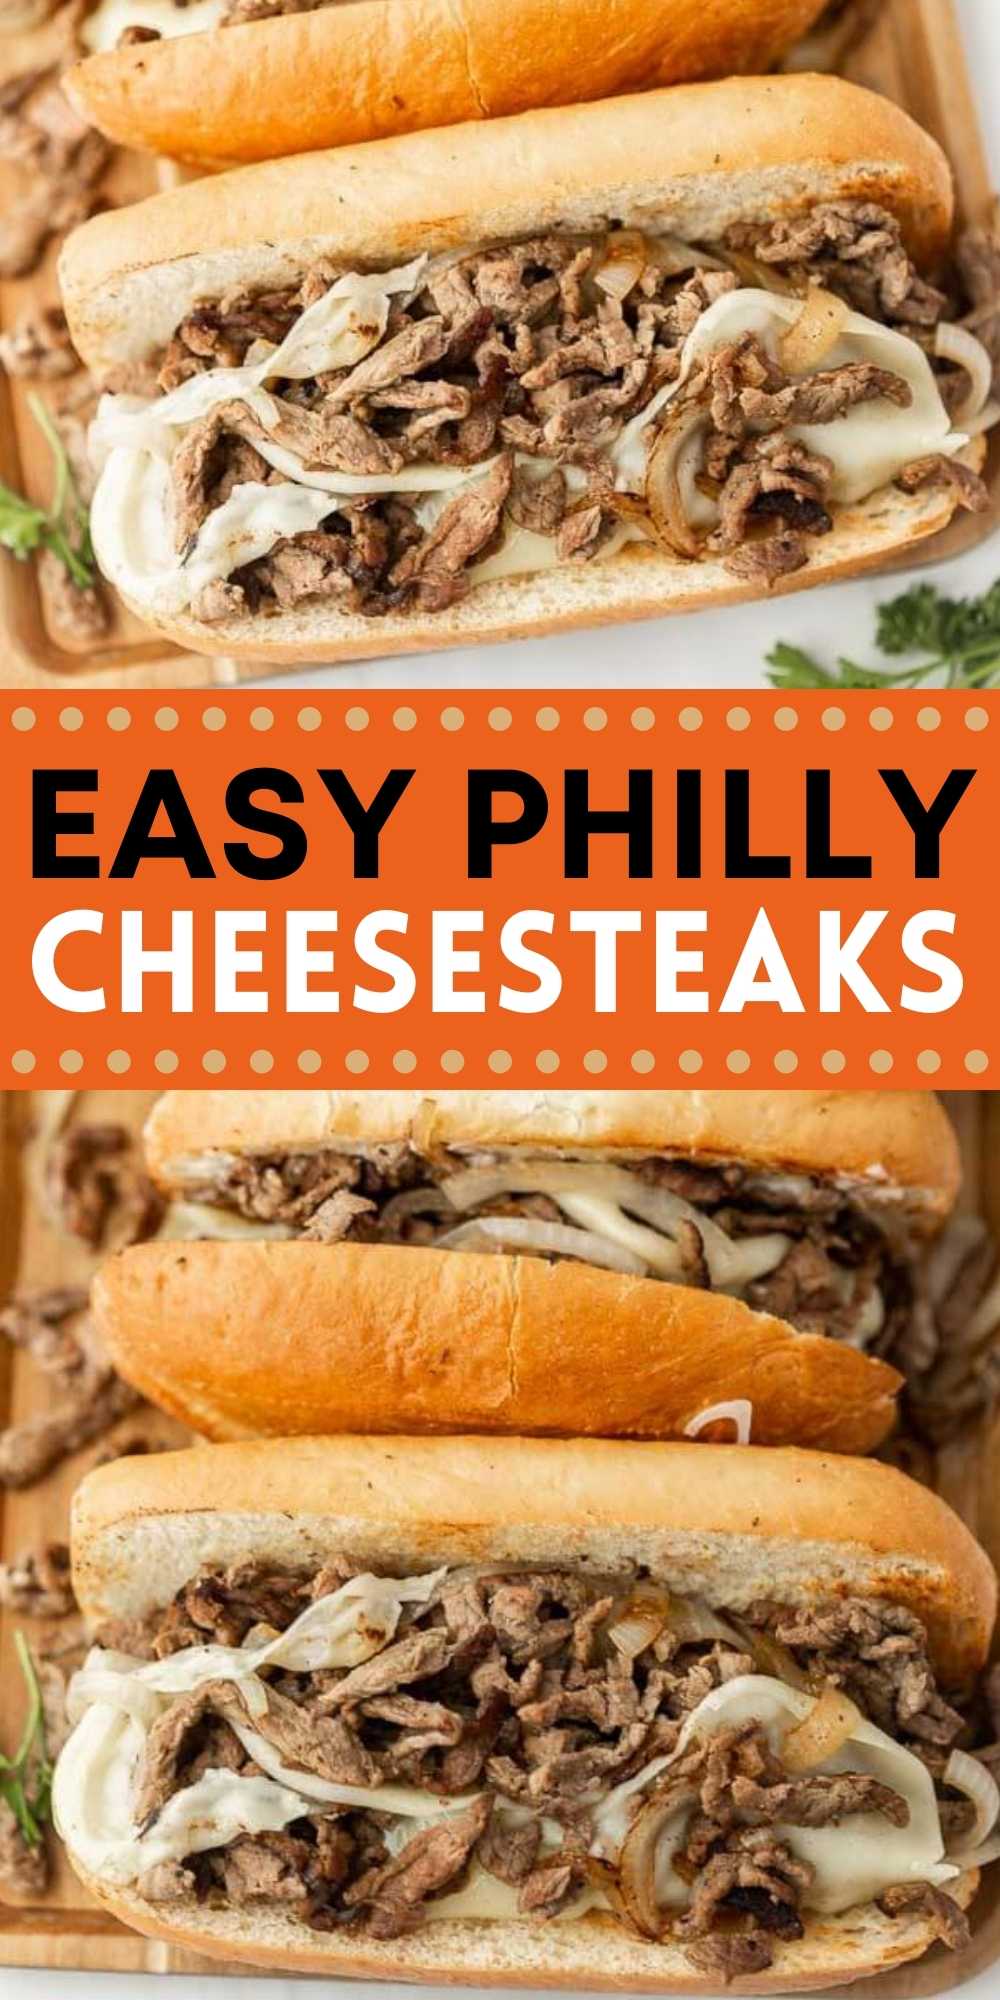 Tender steak topped with sautéed onions and gooey cheese make these Philly cheesesteaks amazing. Get dinner on the table in minutes. This Philly cheesesteak sandwich is easy to make at home with this simple recipe and the entire family will love them! #eatingonadime #phillyrecipes #cheesesteakrecipes #steakrecipes #sandwichrecipes 
